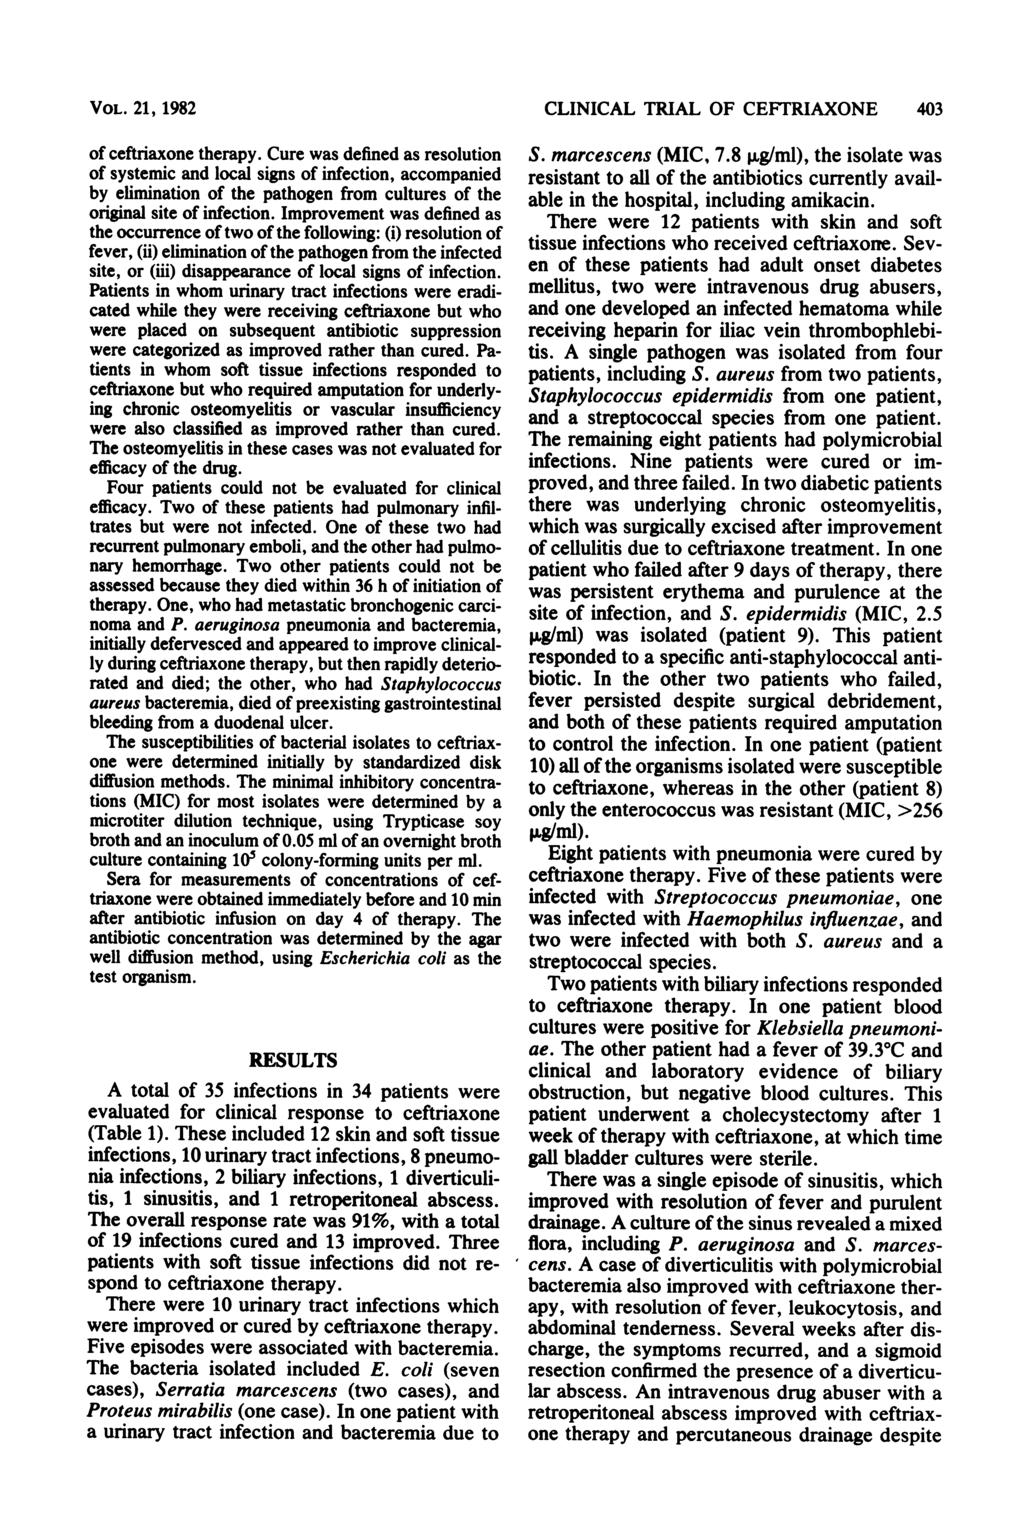 VOL 21, 1982 of ceftriaxone therapy ure was defined as resolution of systemic and local signs of infection, accompanied by elimination of the pathogen from cultures of the original site of infection